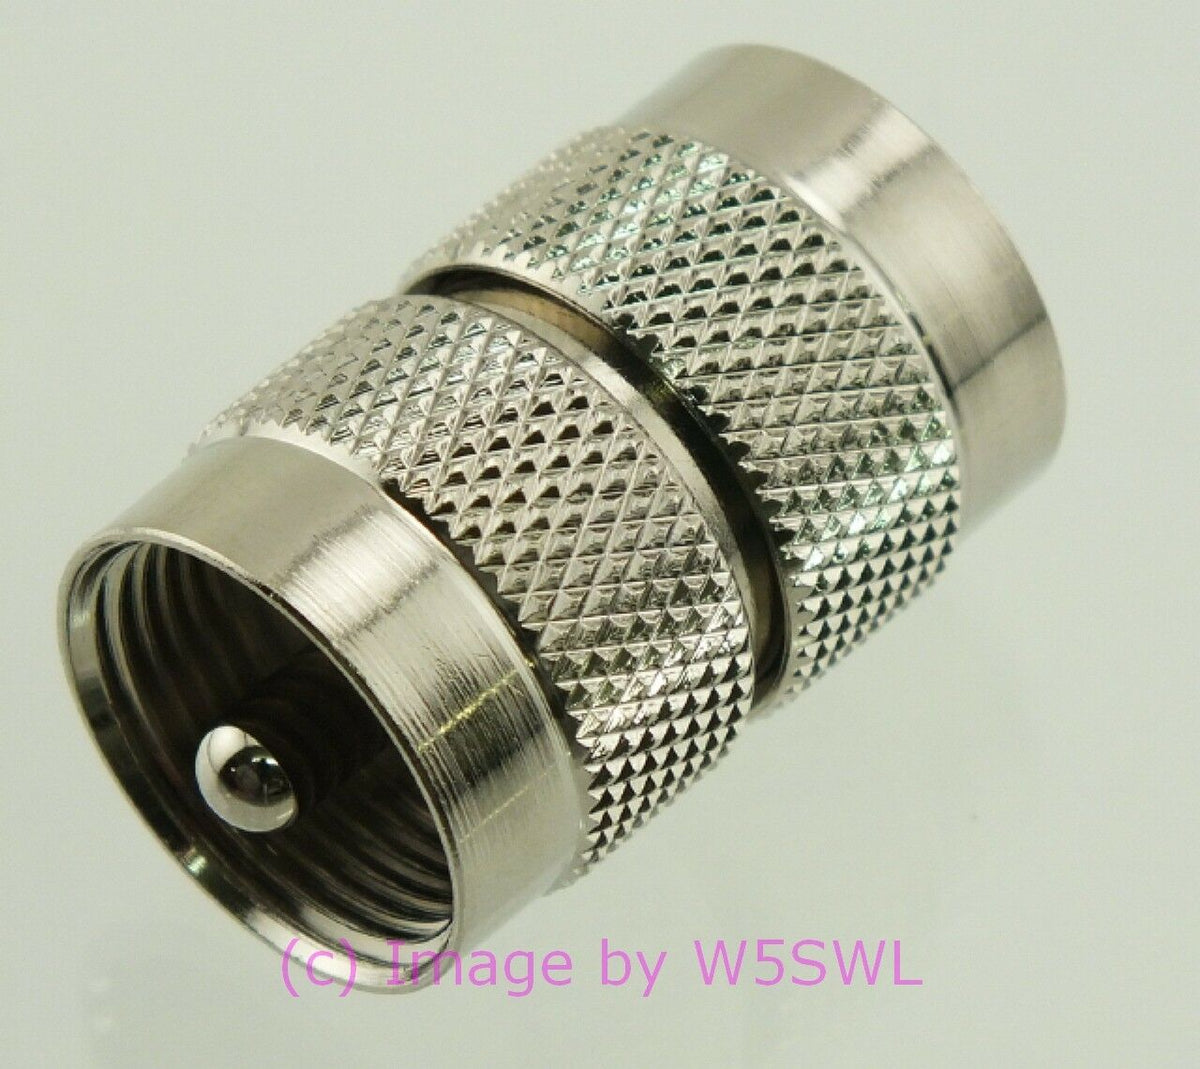 W5SWL Brand UHF Male to UHF Male Coax Connector Adapter Coupler - Dave's Hobby Shop by W5SWL